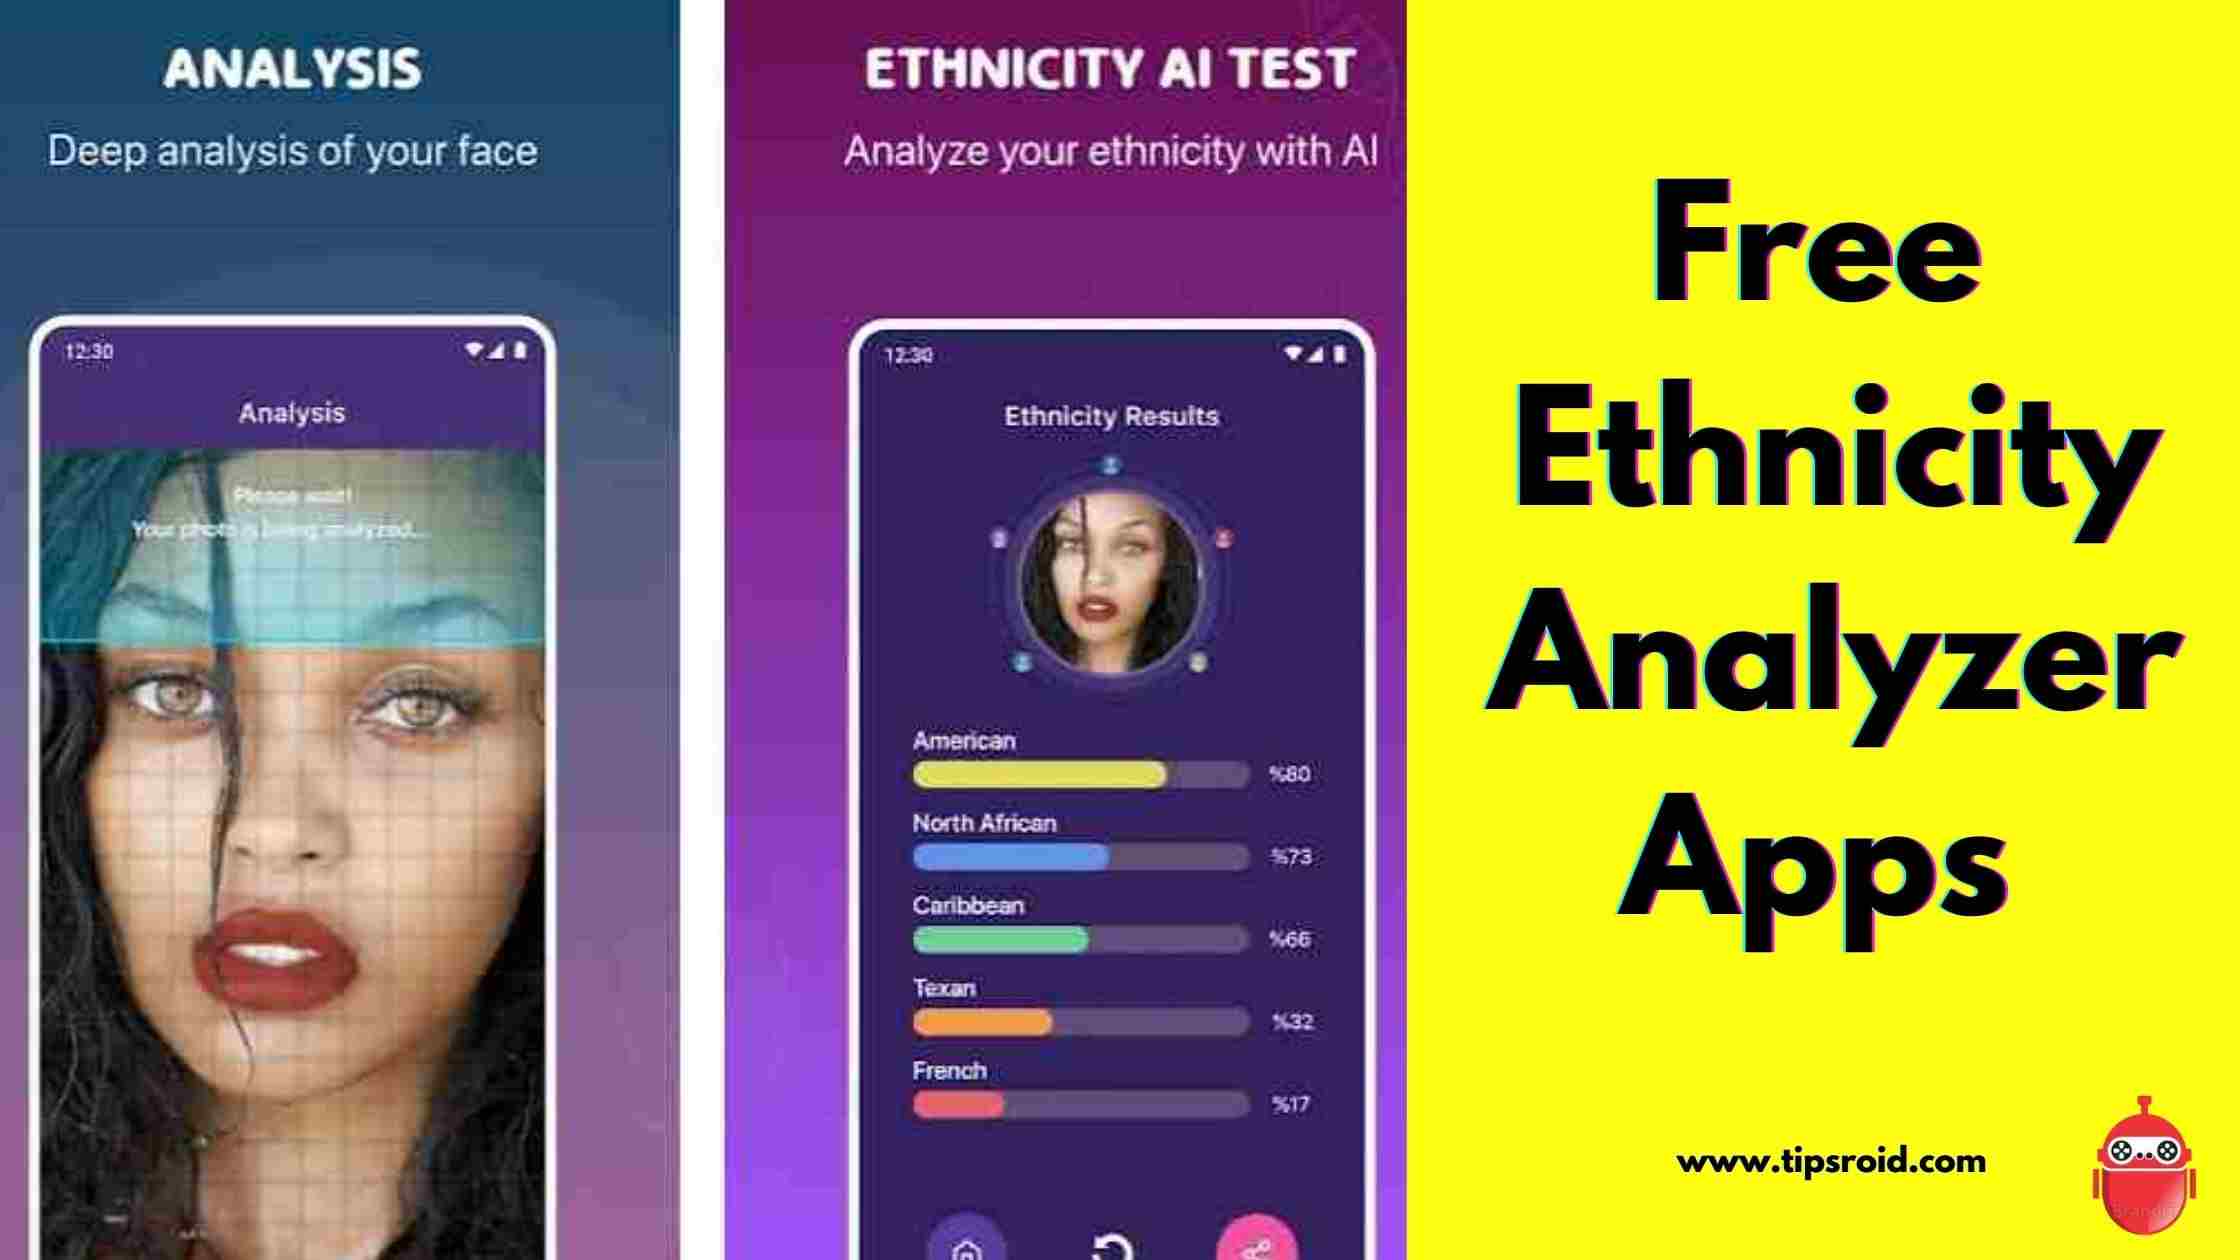 6 Free Ethnicity Analyzer Apps for Android And iPhone